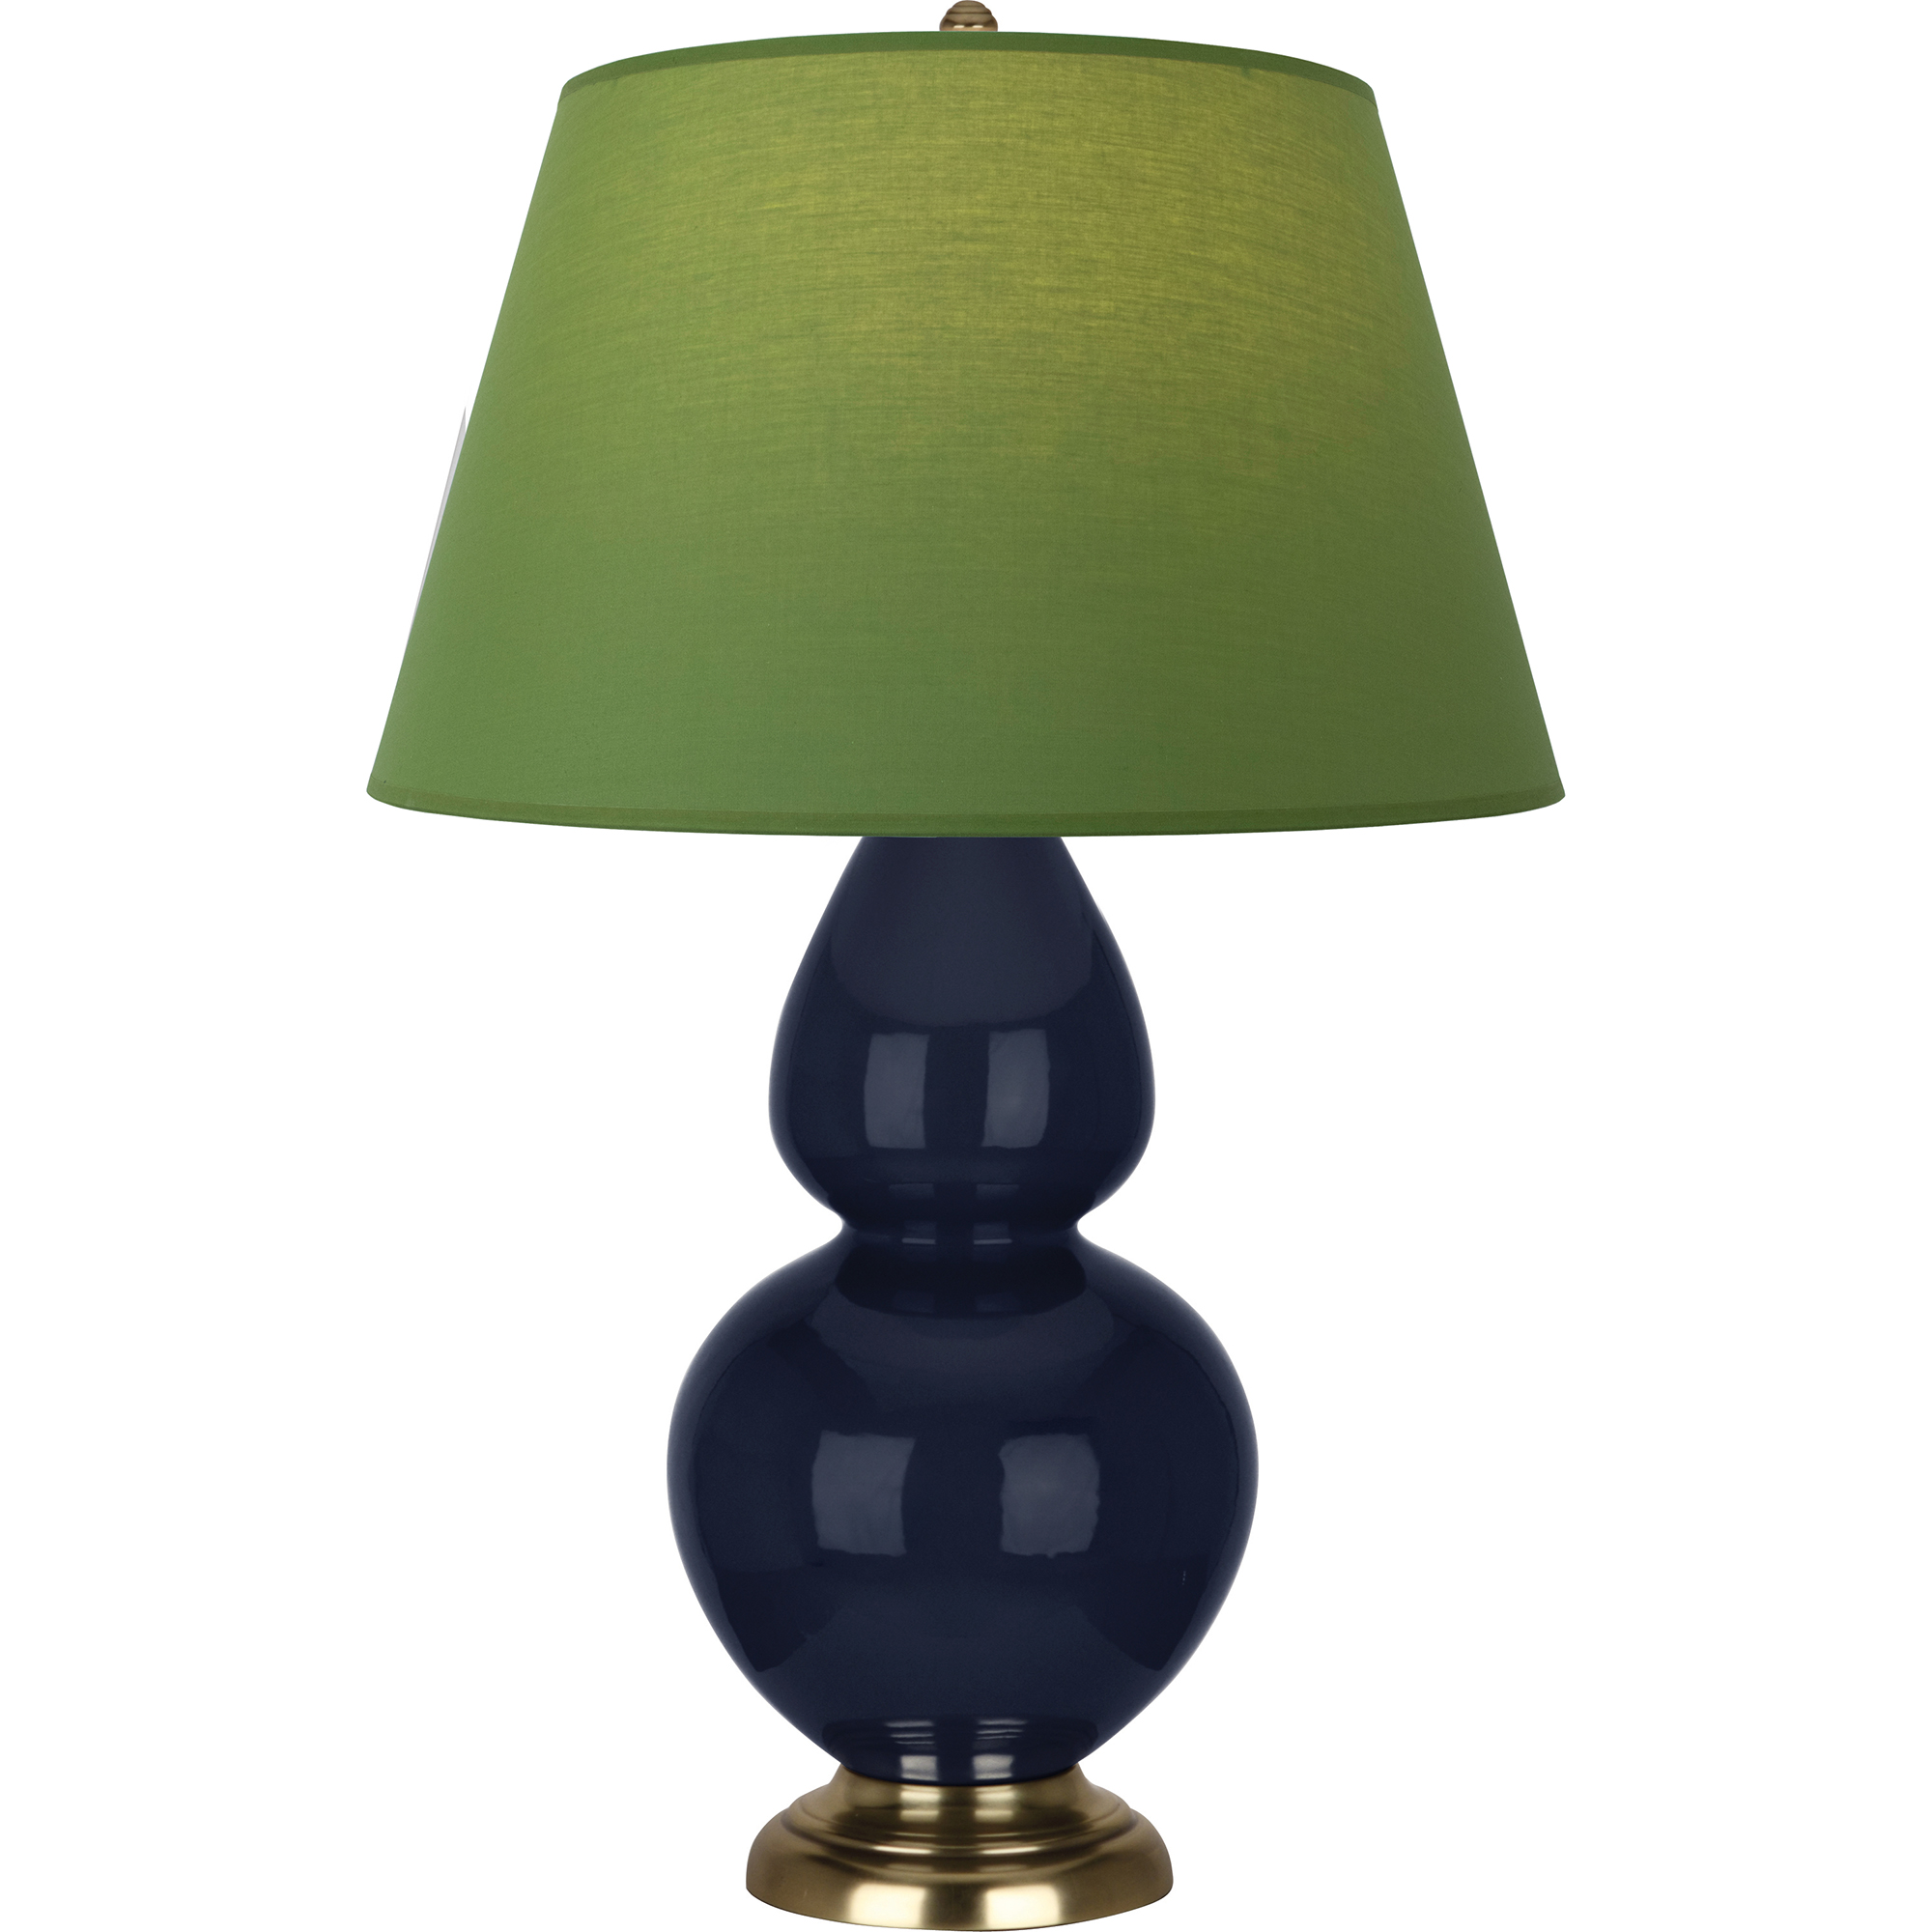 Double Gourd Table Lamp Style #MB20G